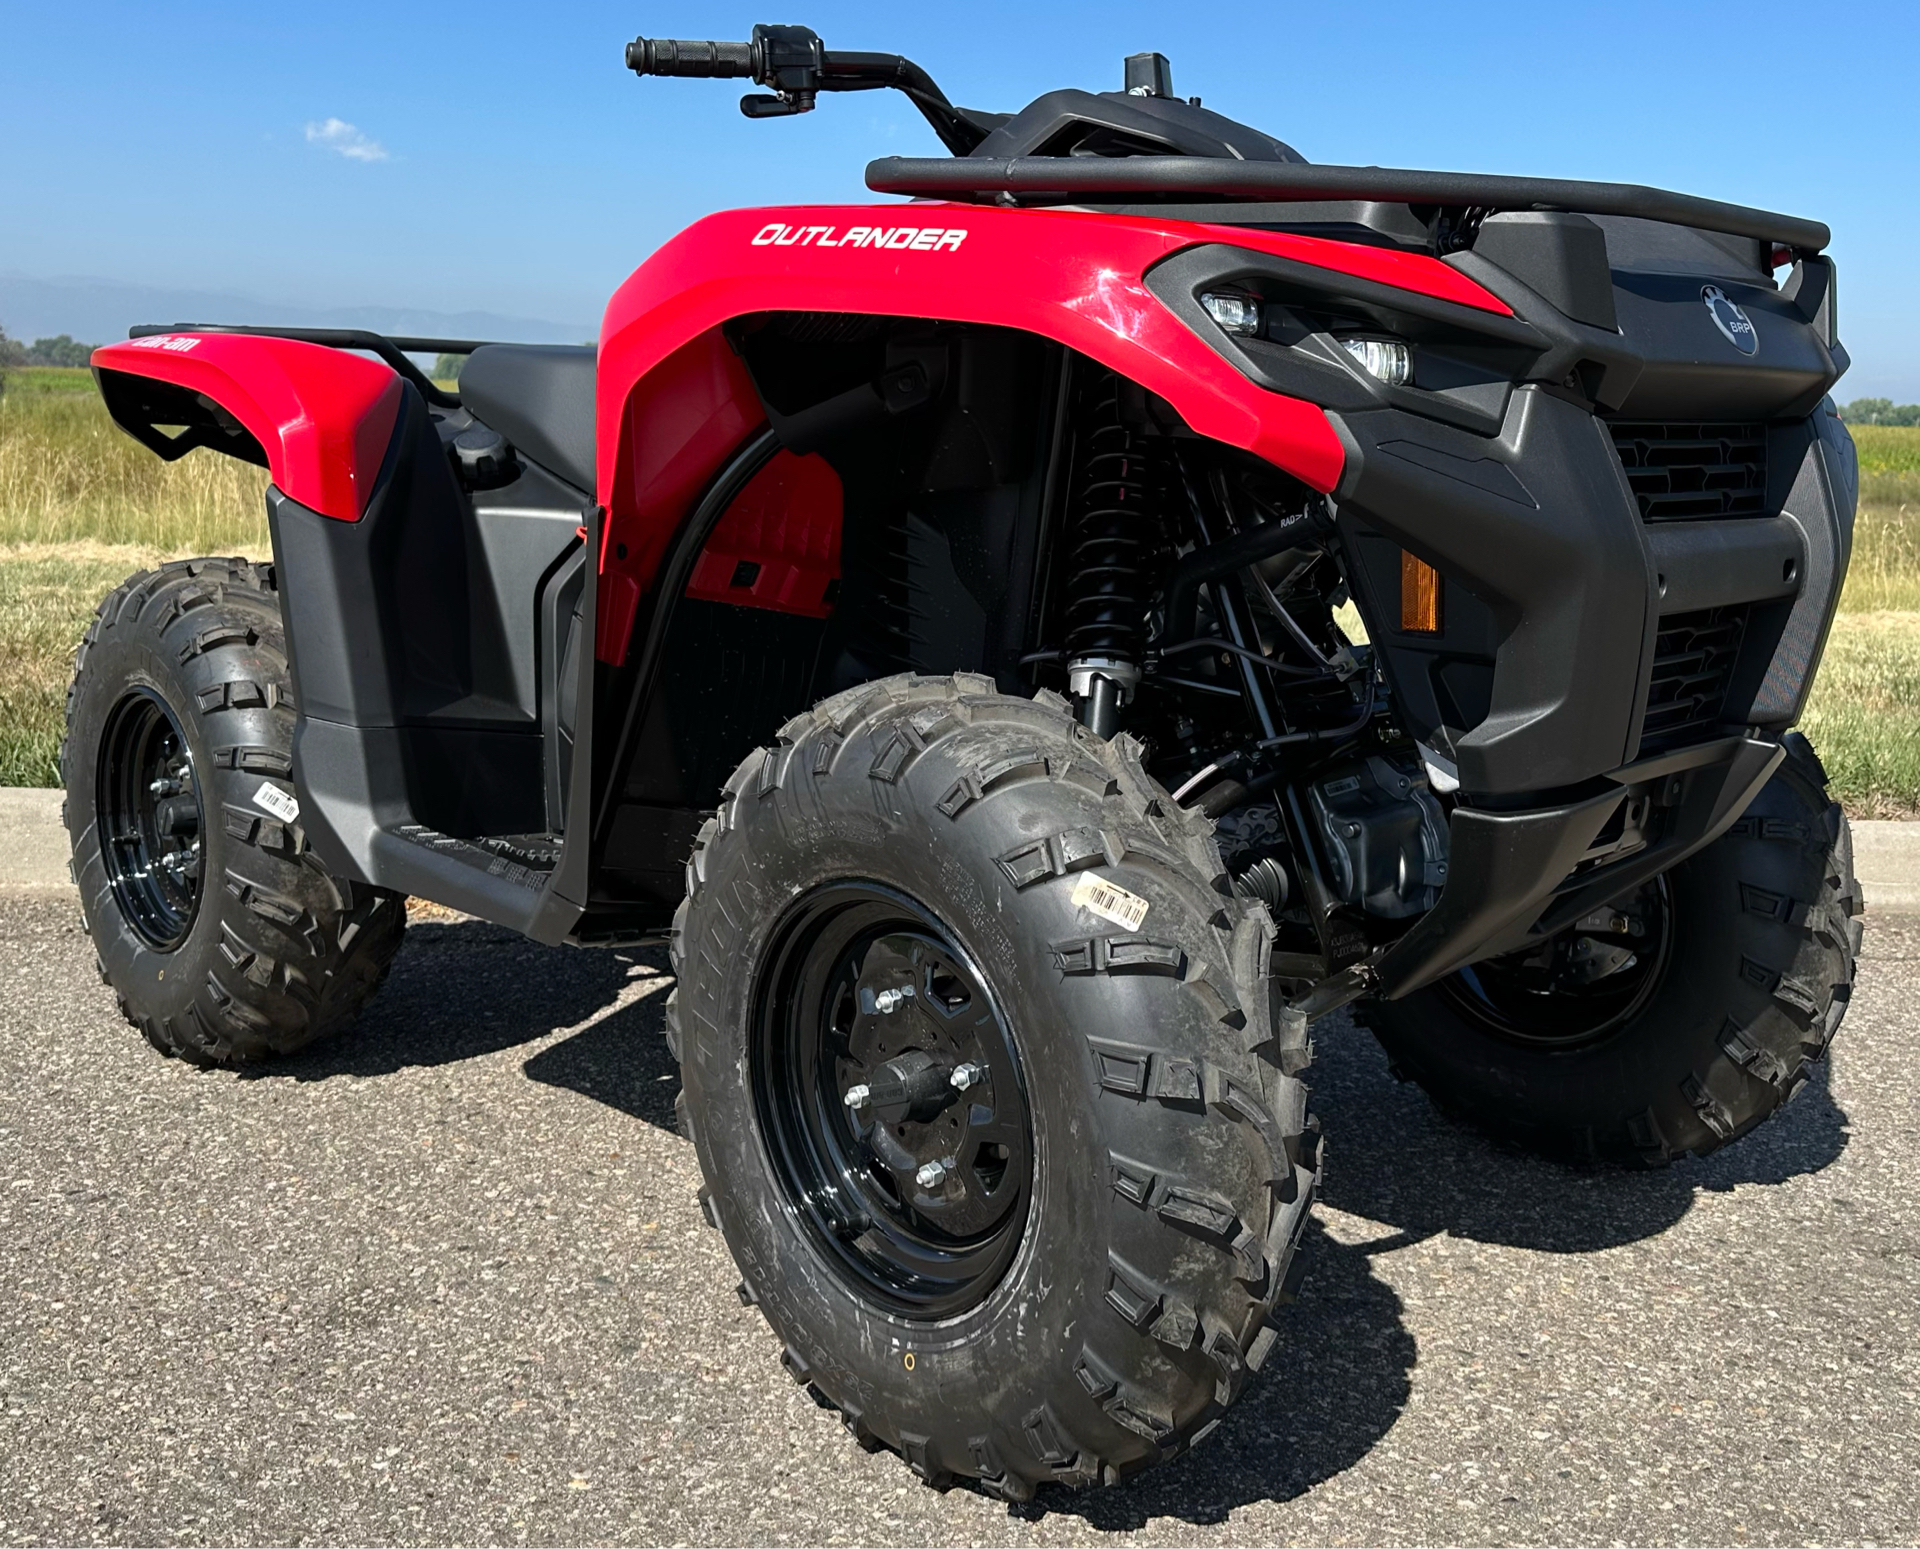 2023 Can-Am Outlander DPS 700 in Fort Collins, Colorado - Photo 1